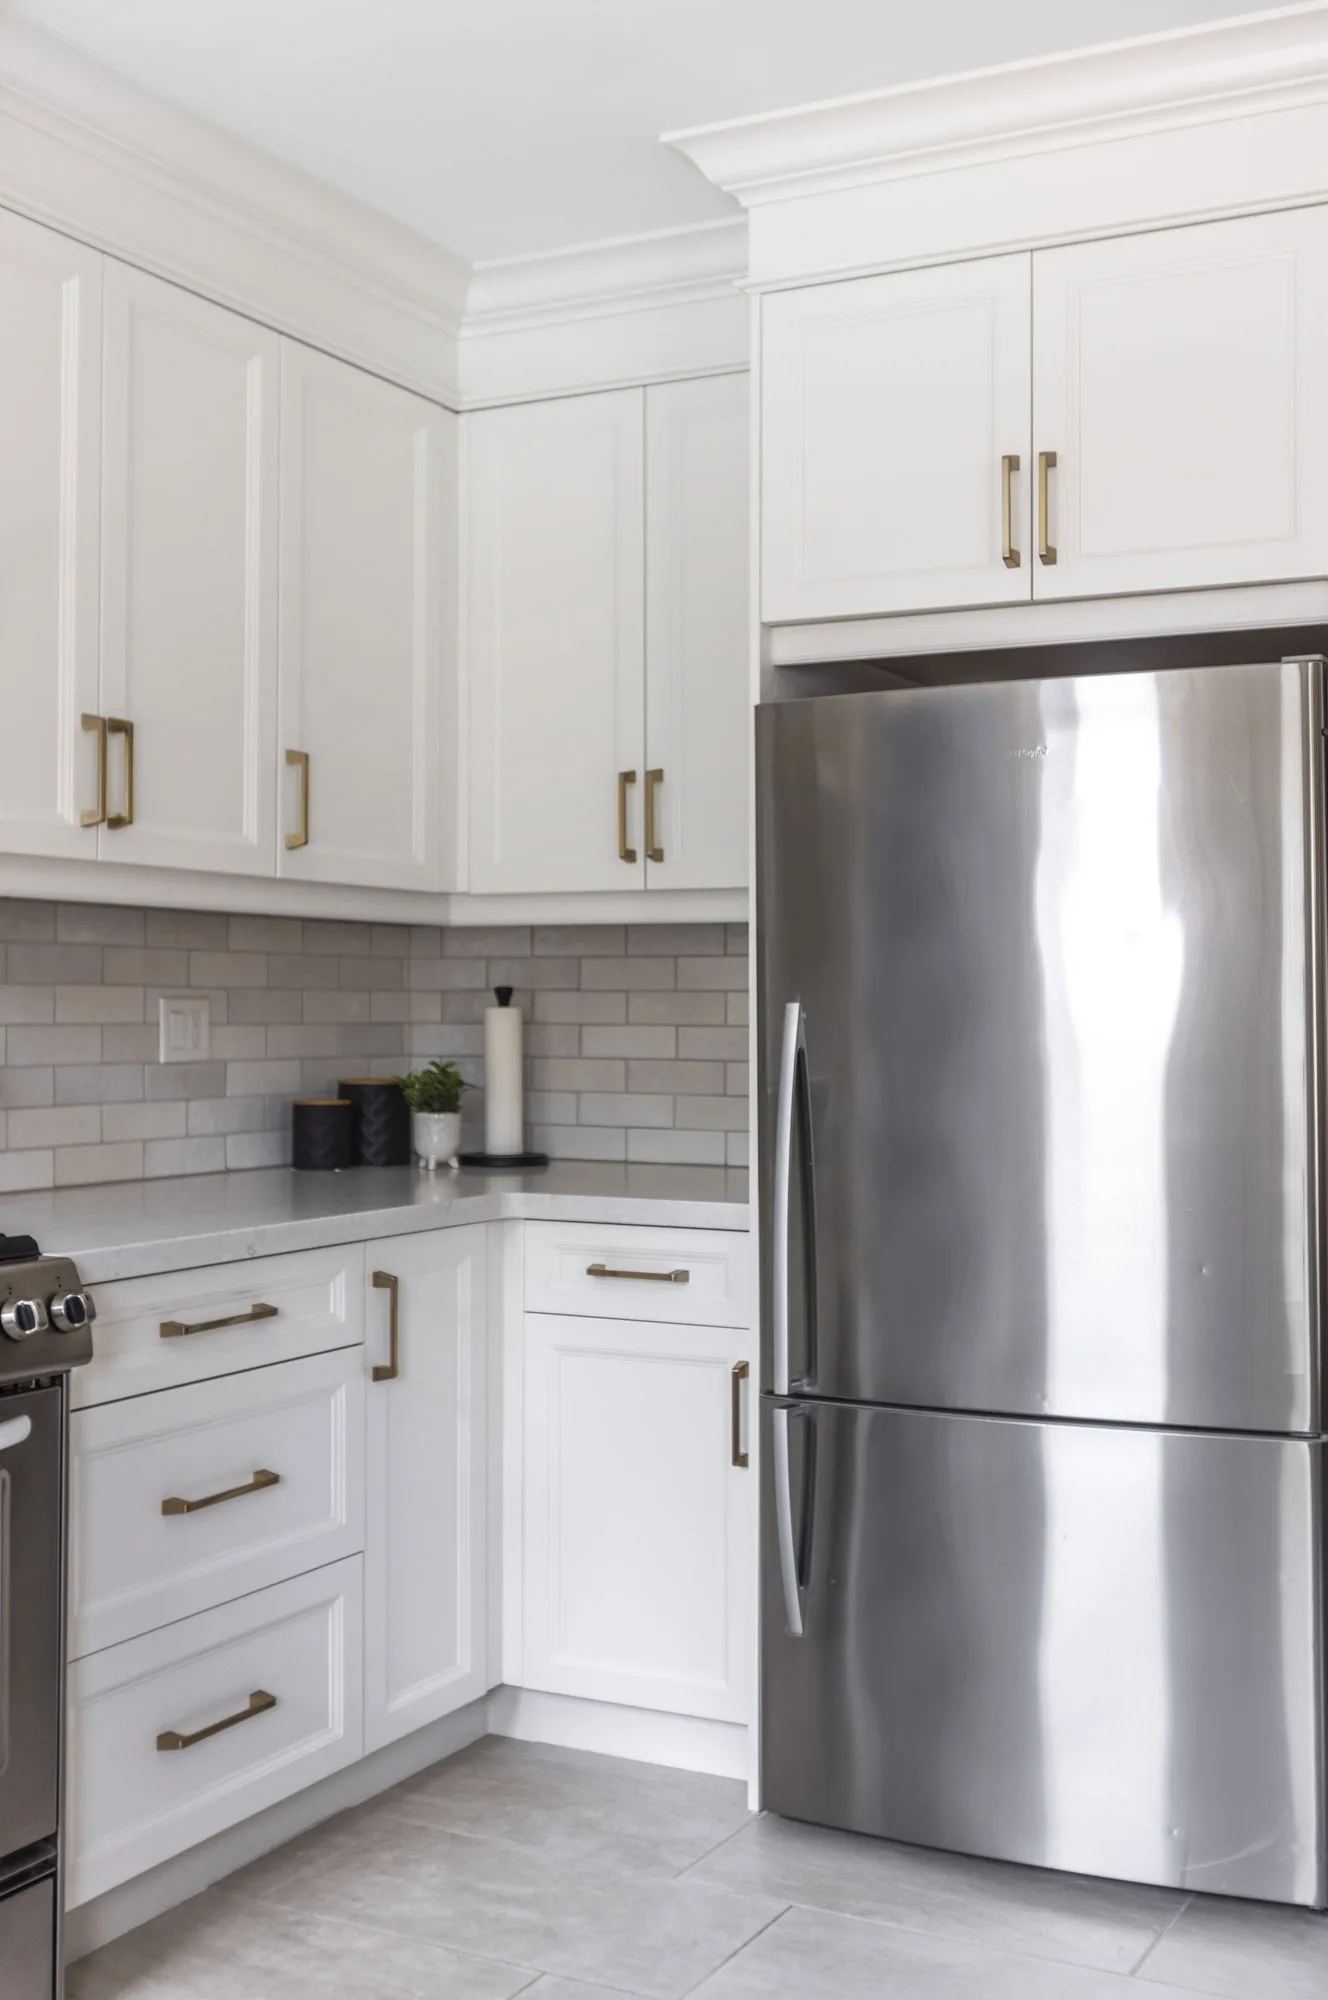 A kitchen with white upper and lower cupboards with silver handles with a stainless steel fridge.